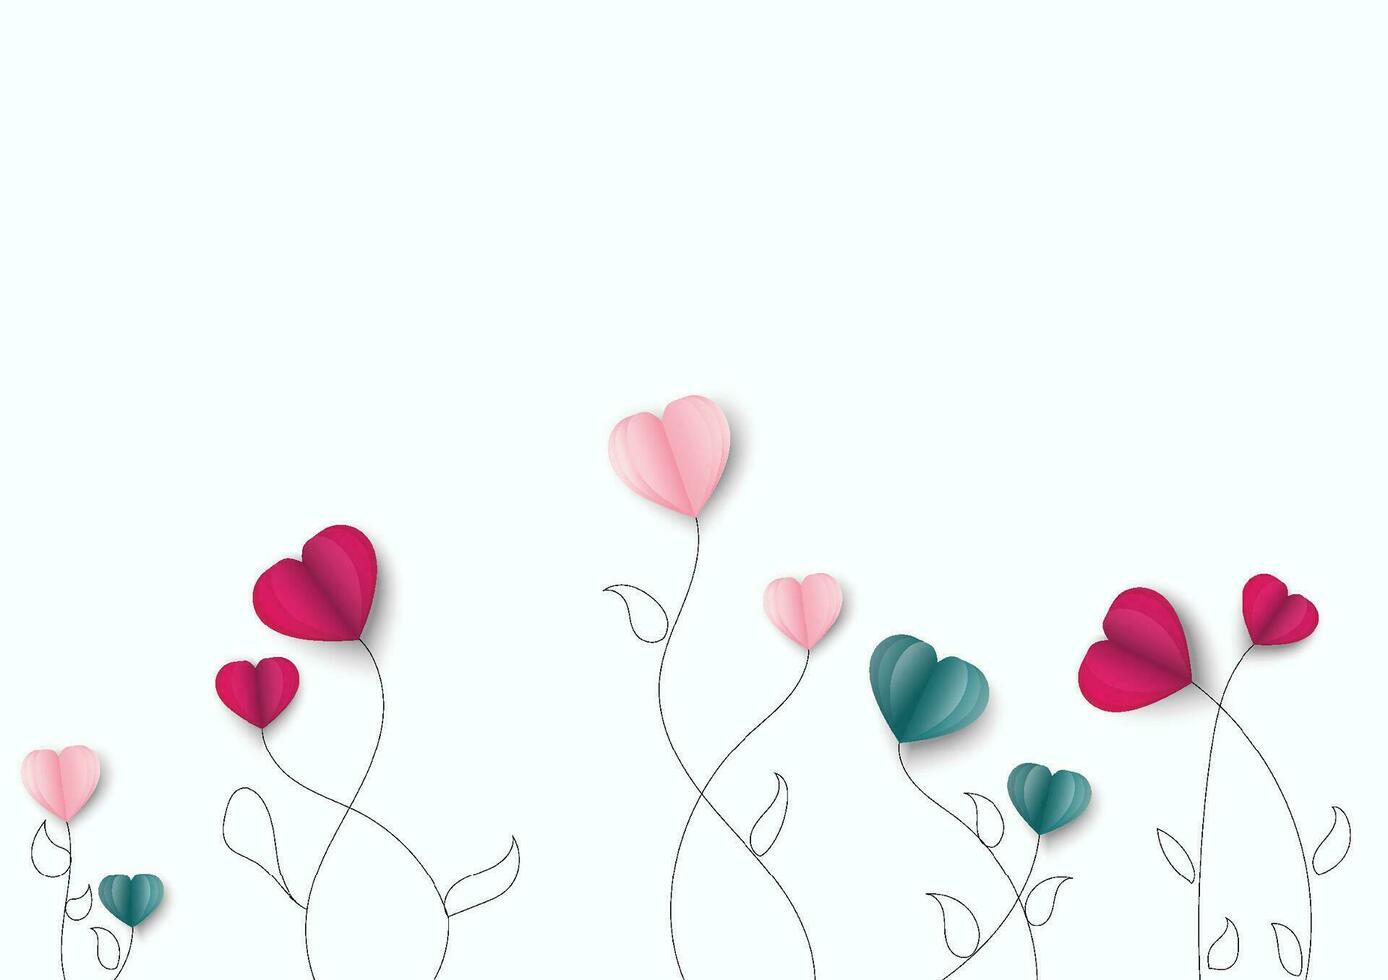 Balloons trees on white background.Heart shaped balloons icon.Valentines day, Paper art style of valentine's day, vector love elements background.